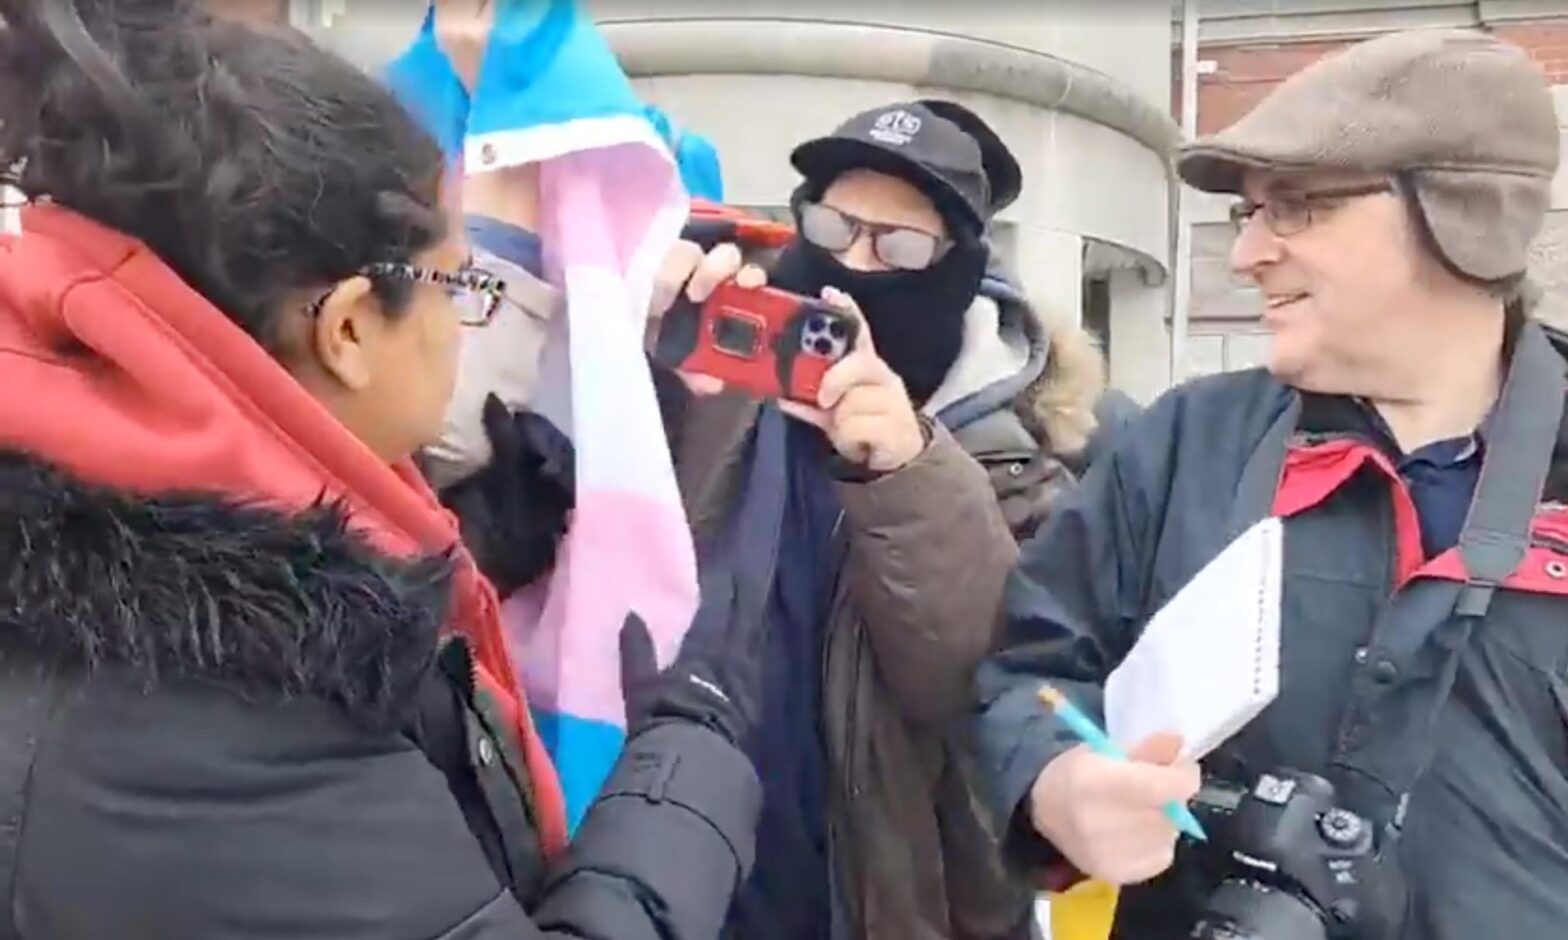 Guy with fogged up glasses pointing his camera at Caryma filming while he shoves someone holding a trans flag, with some older white guy holding a notebook next to them.